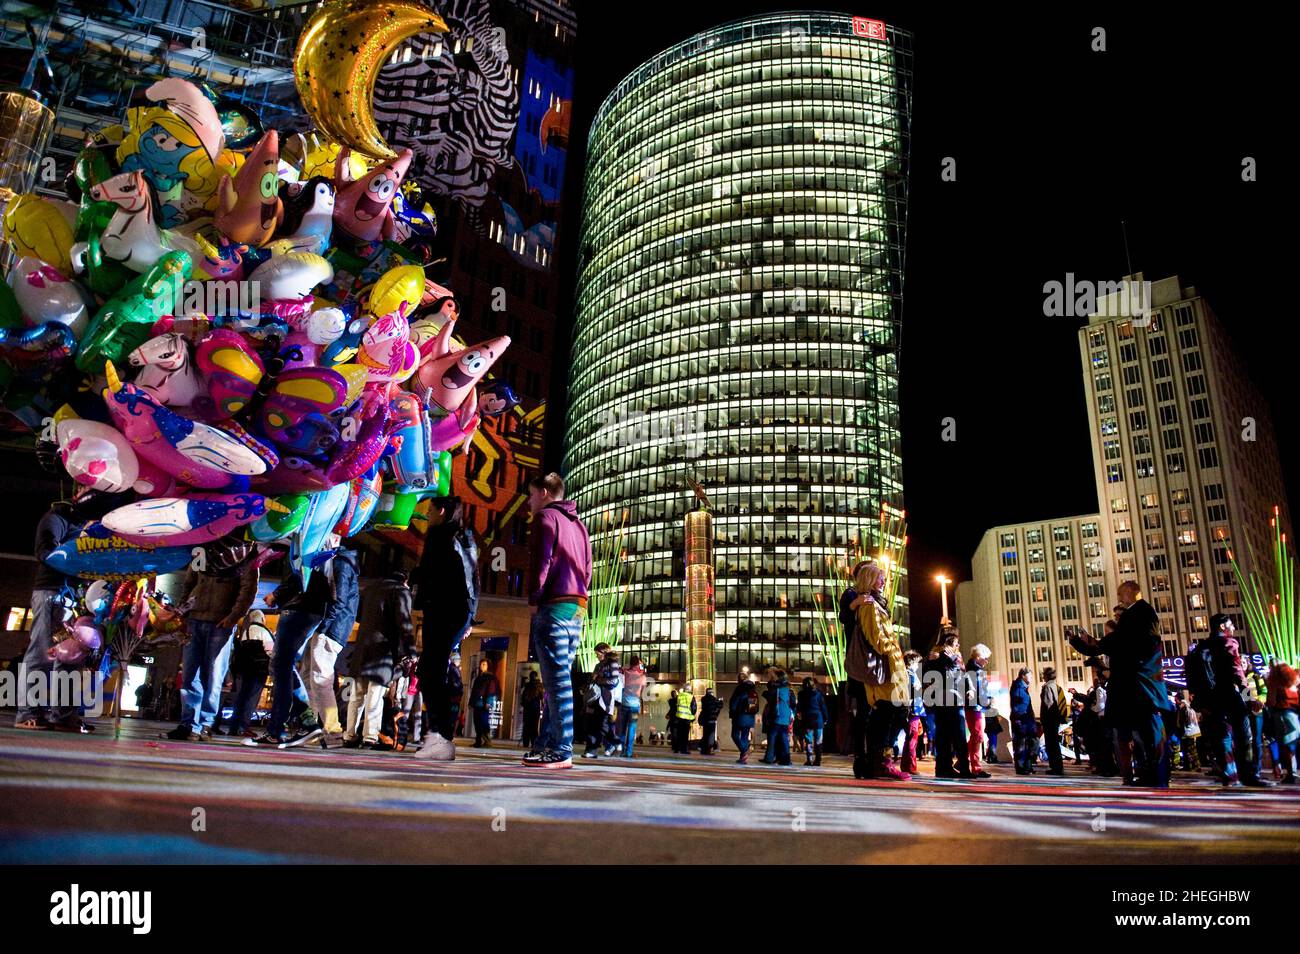 GERMANY. BERLIN. SONY CENTER IS A SONY-SPONSORED BUILDING COMPLEX LOCATED AT THE POTSDAMER PLATZ Stock Photo